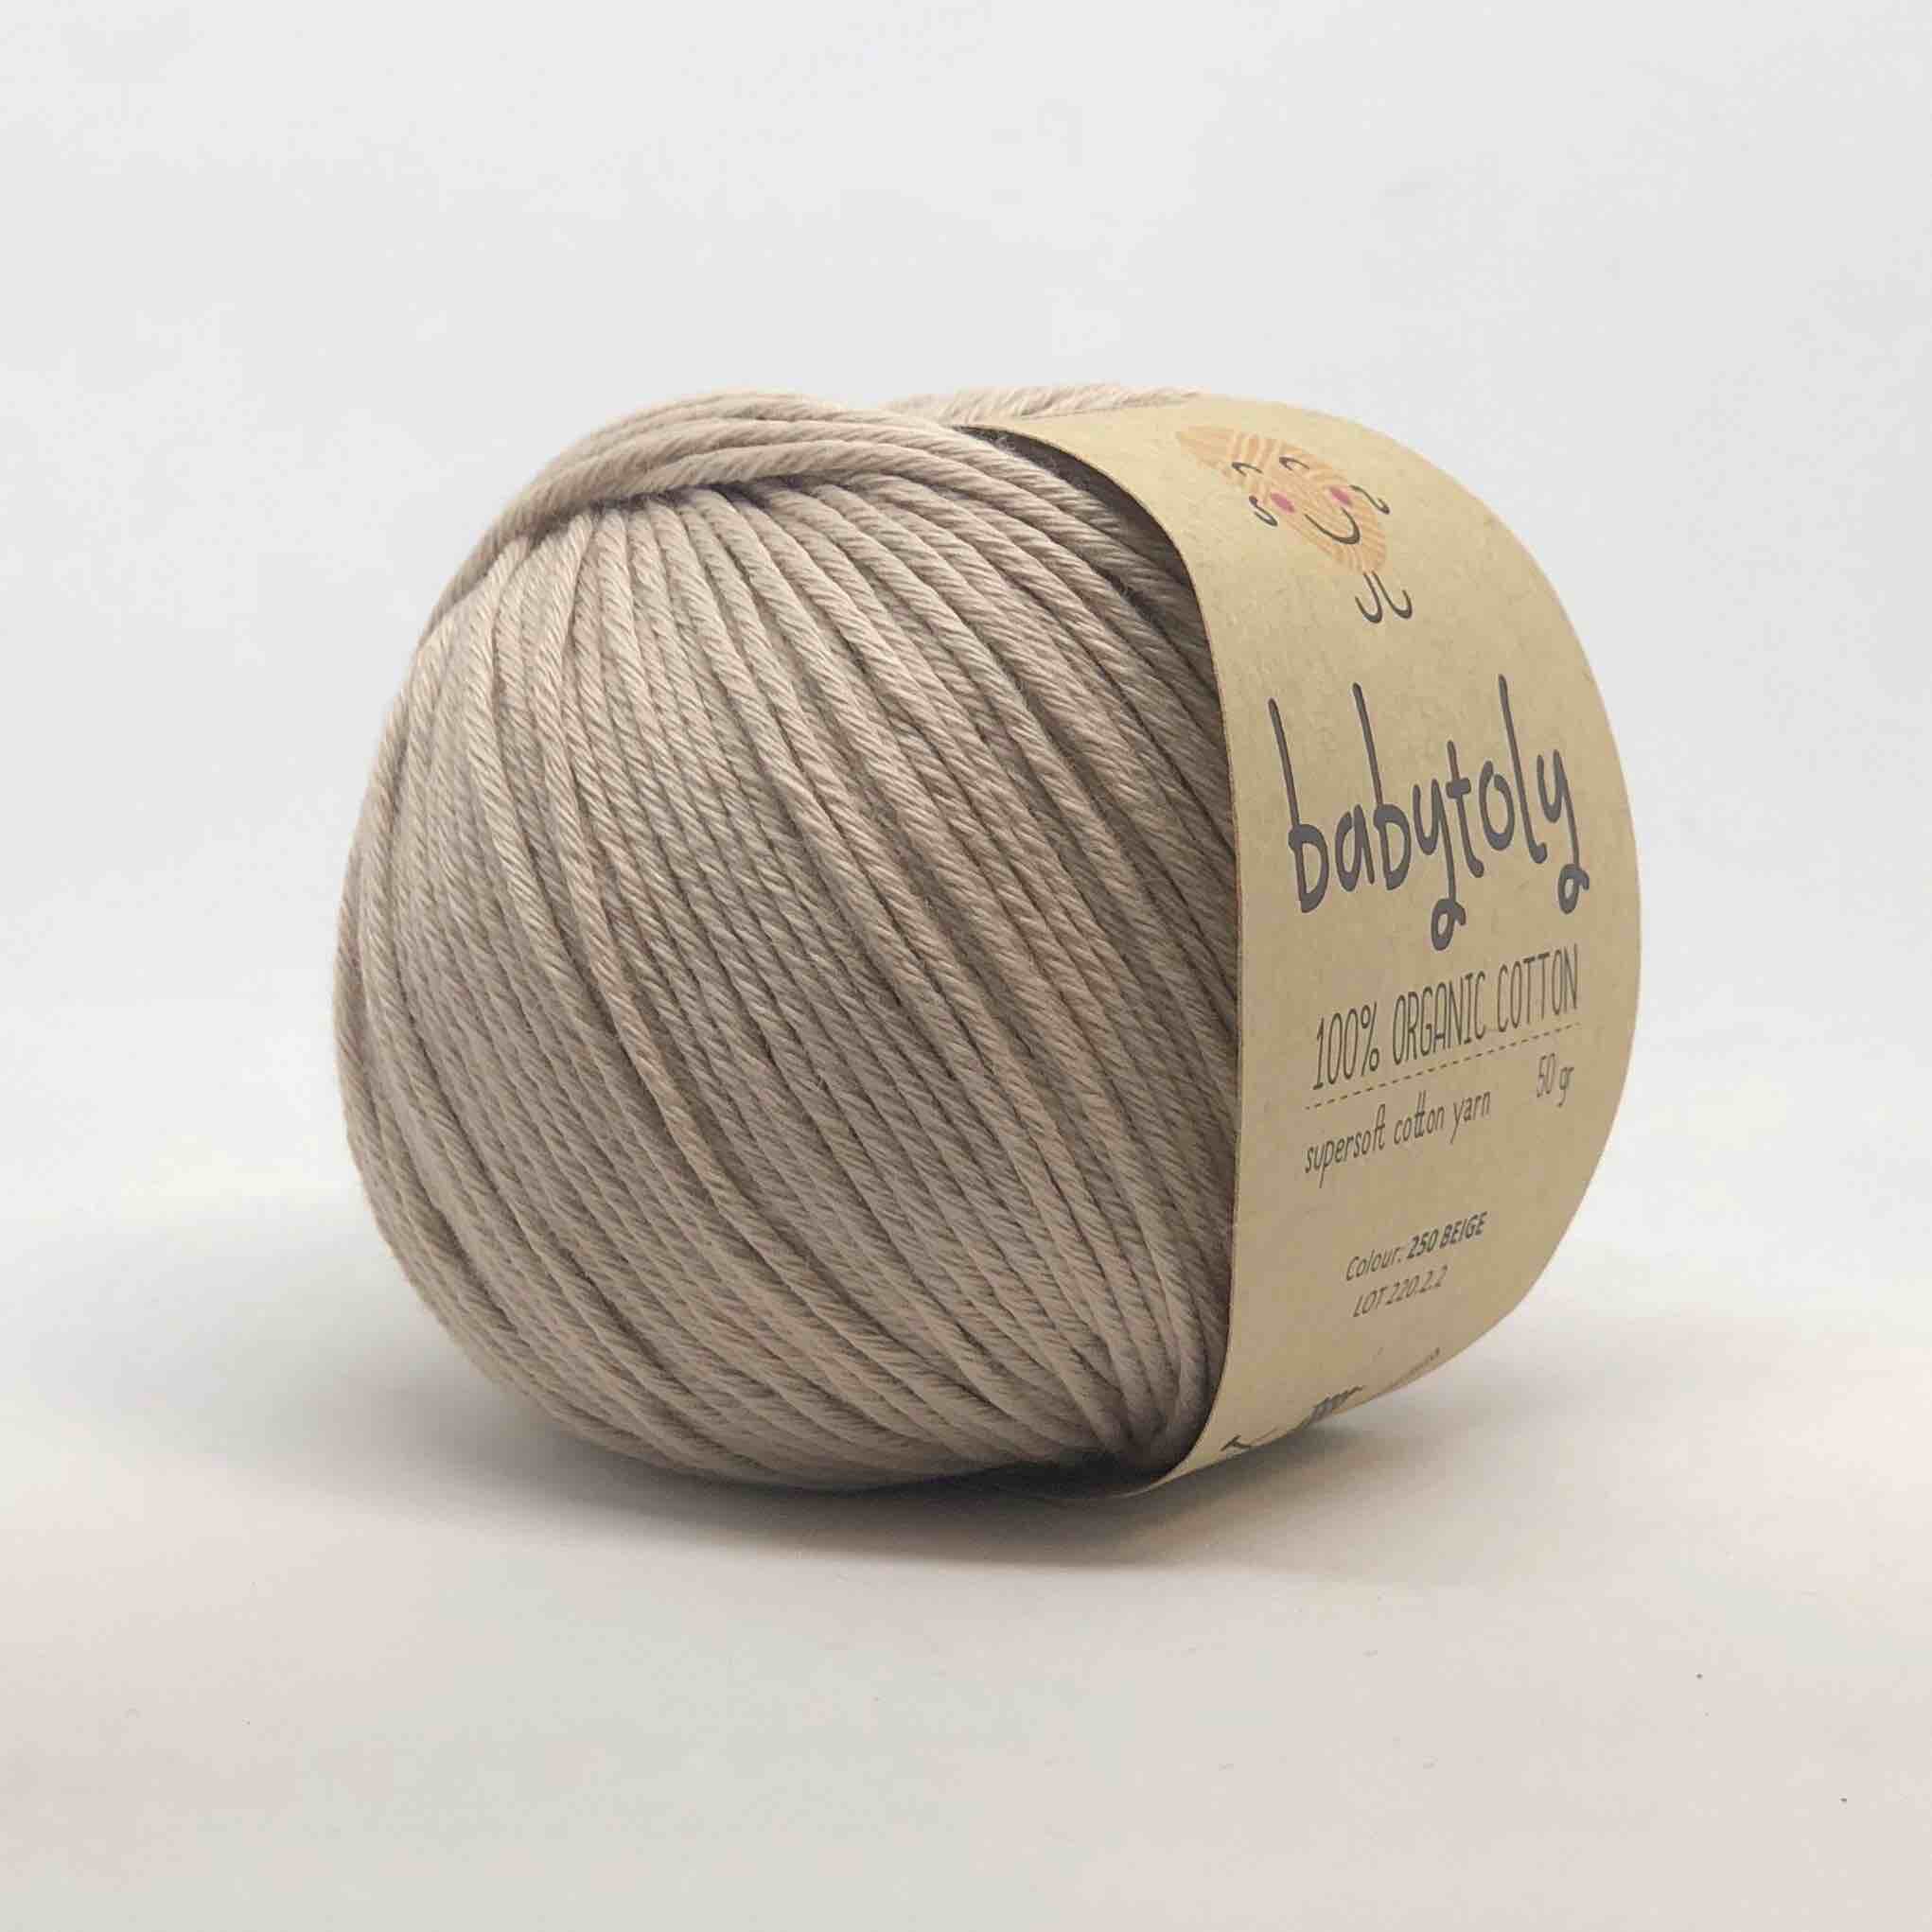 Cotton Yarn for Knitting and Crochet. Yarn Eco Cotton Baby. Baby